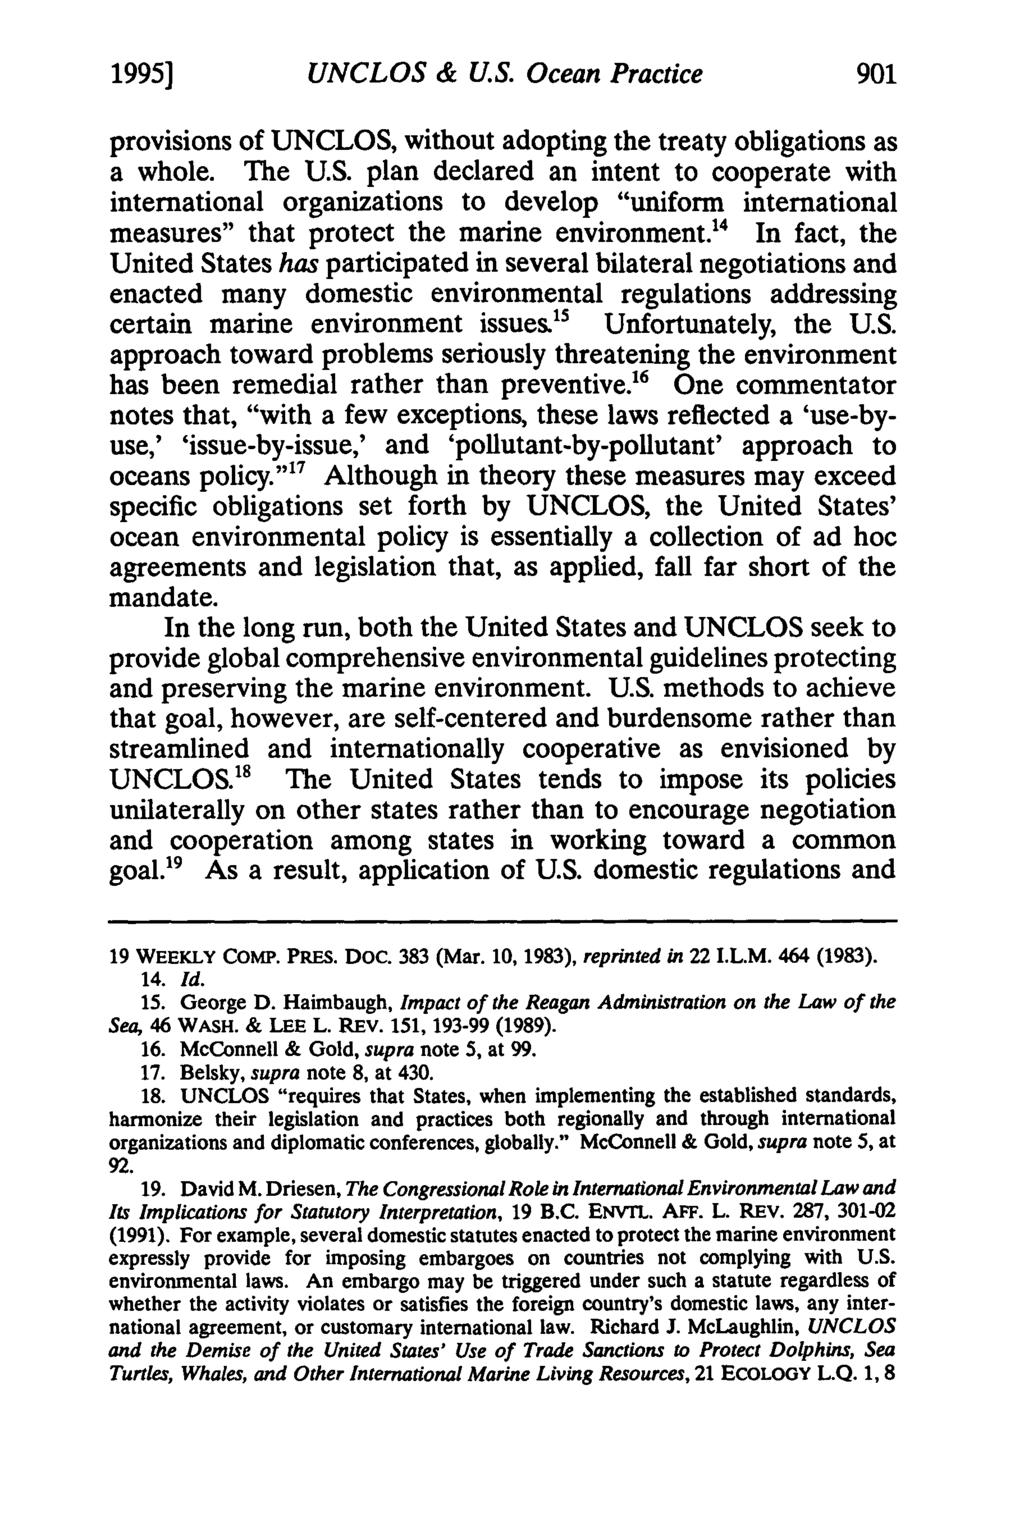 1995] UNCLOS & U.S. Ocean Practice provisions of UNCLOS, without adopting the treaty obligations as a whole. The U.S. plan declared an intent to cooperate with international organizations to develop "uniform international measures" that protect the marine environment.